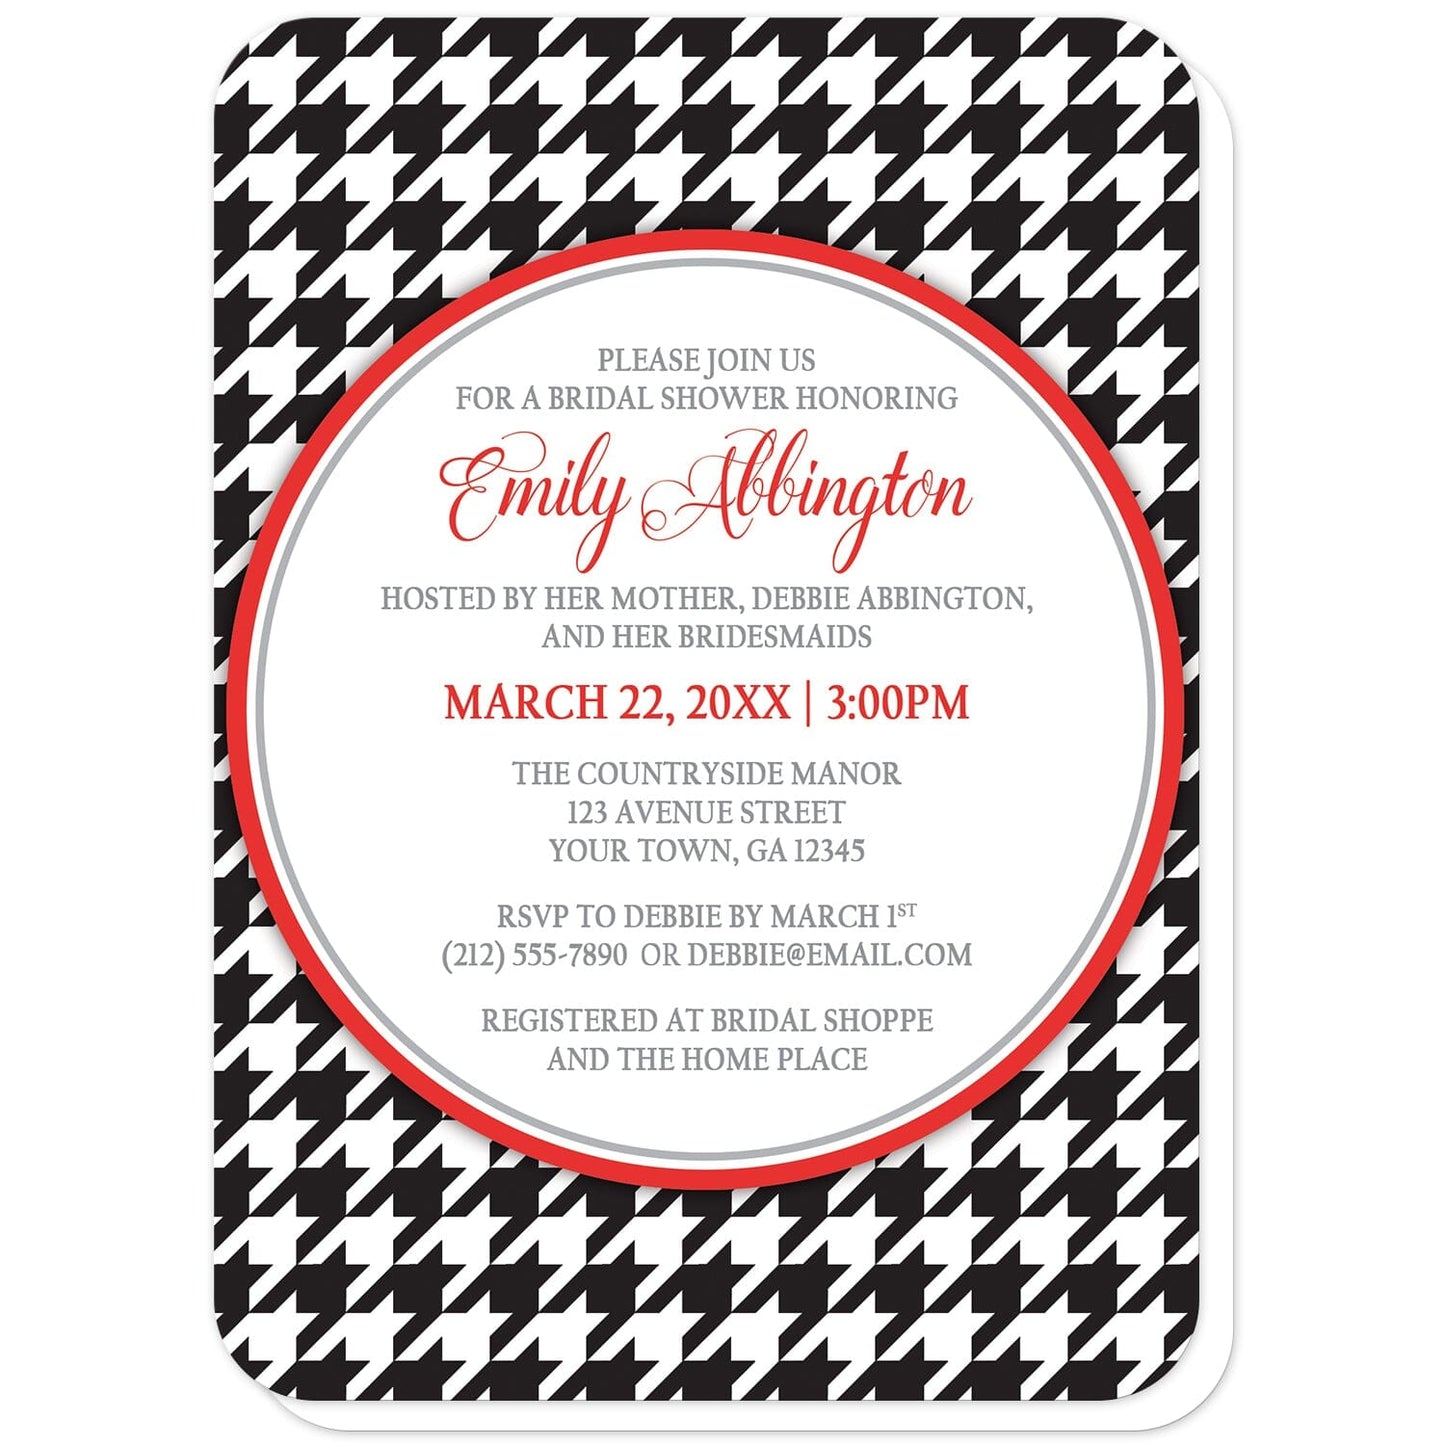 Stylish Black Houndstooth Red Bridal Shower Invitations (with rounded corners) at Artistically Invited. Stylish black houndstooth red bridal shower invitations with your personalized bridal shower celebration details custom printed in red and gray inside a white circle over a black and white houndstooth pattern. 